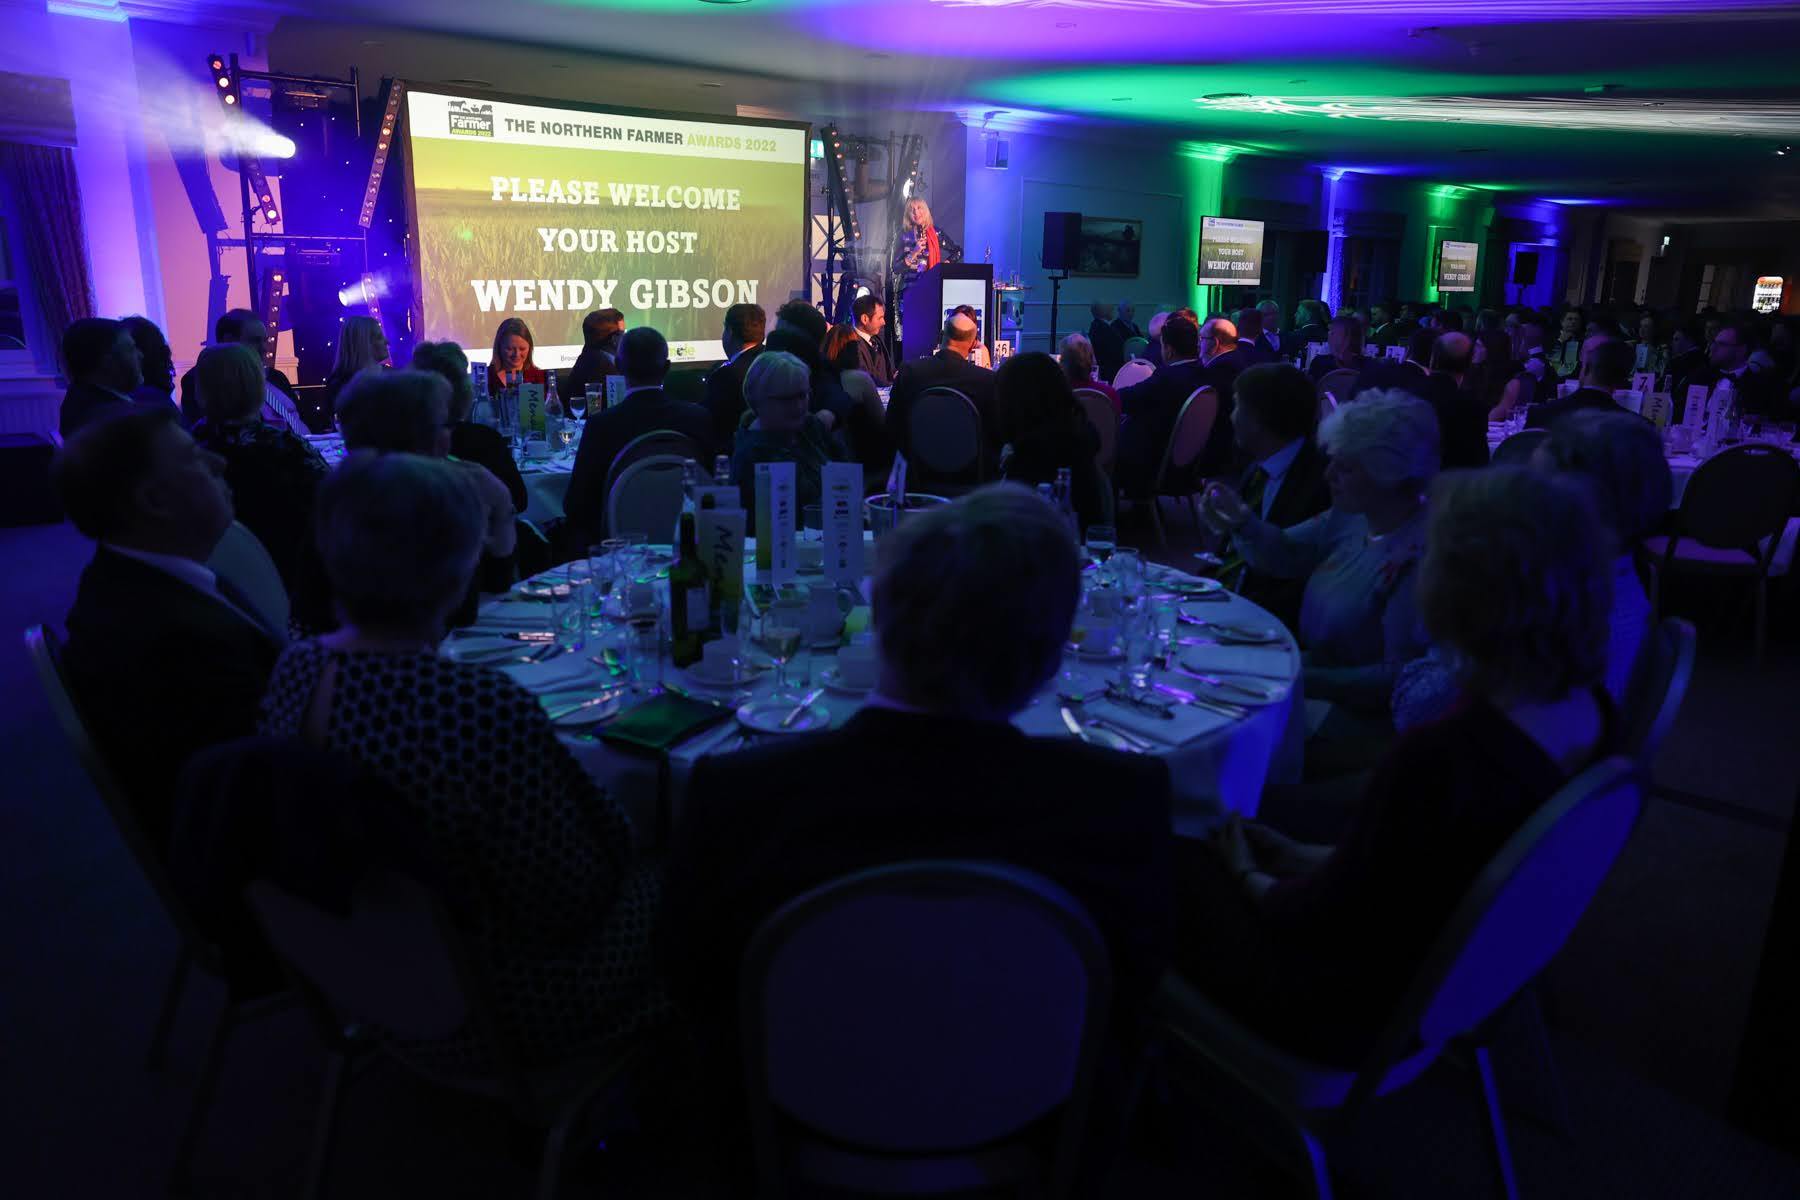 The Northern Farmer Awards 2022 held at The Pavilions in Harrogate. Event host Wendy Gibson. Picture: CHRIS BOOTH